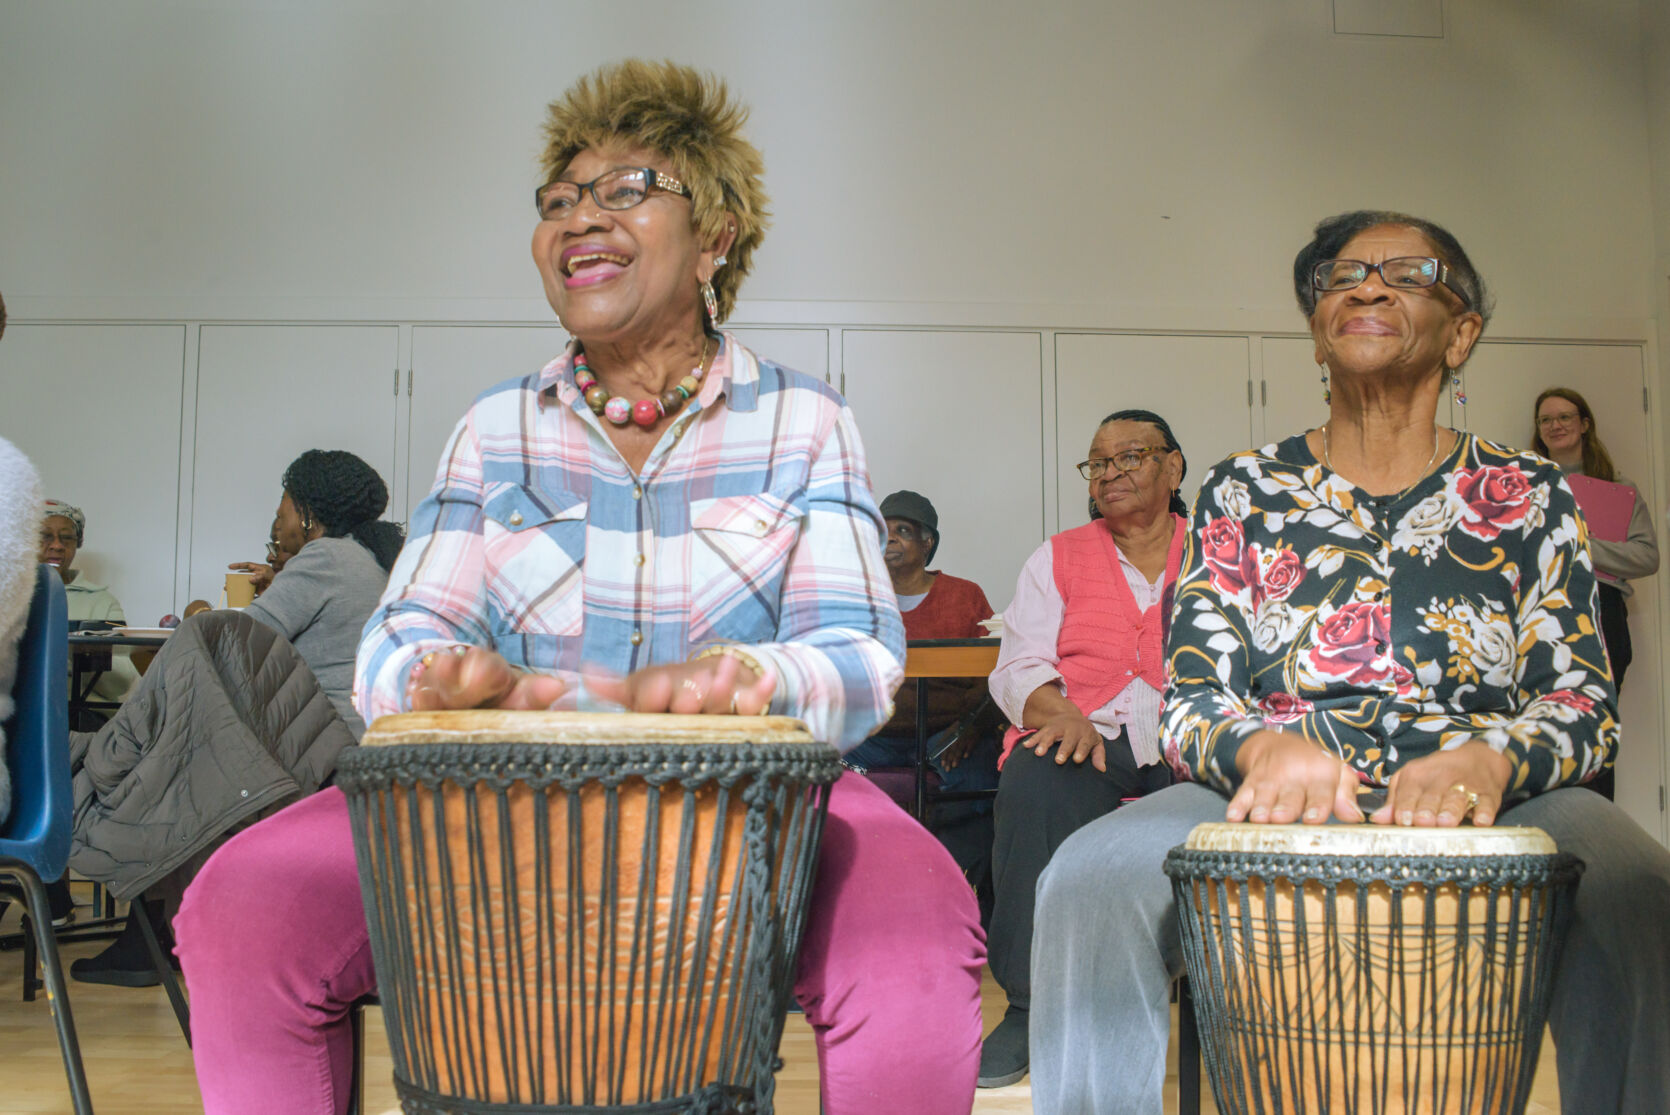 Two people sitting with drums in front of them, ready to play. In the background are other people also sitting but without drums.